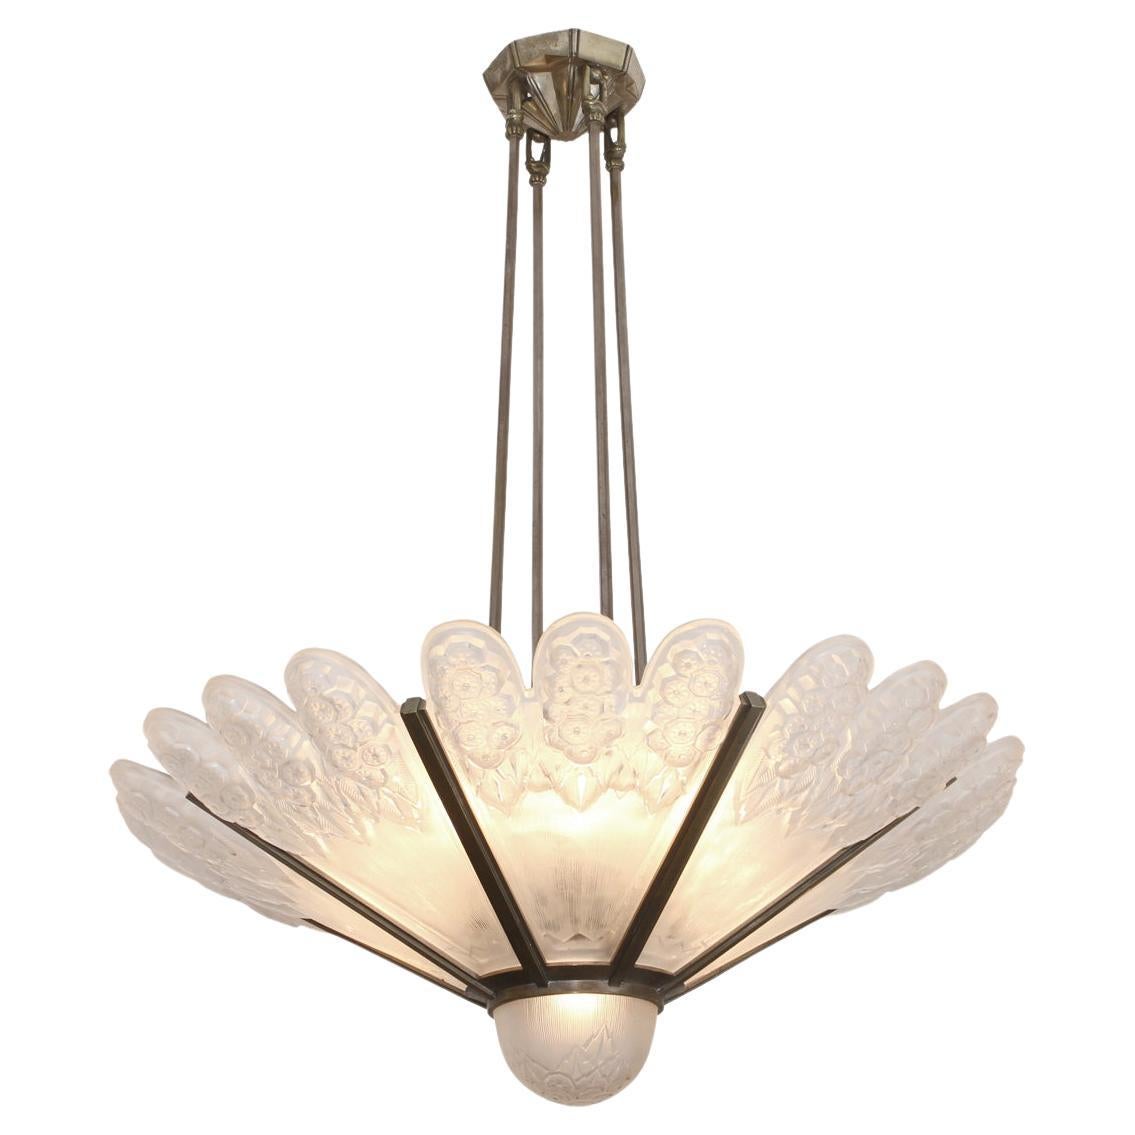 French Art Deco chandelier with its original glass and bronze from 1930 by Genet & Michon with 9 part of glass and geometric decoration representing flowers signed on each side of the glass. 